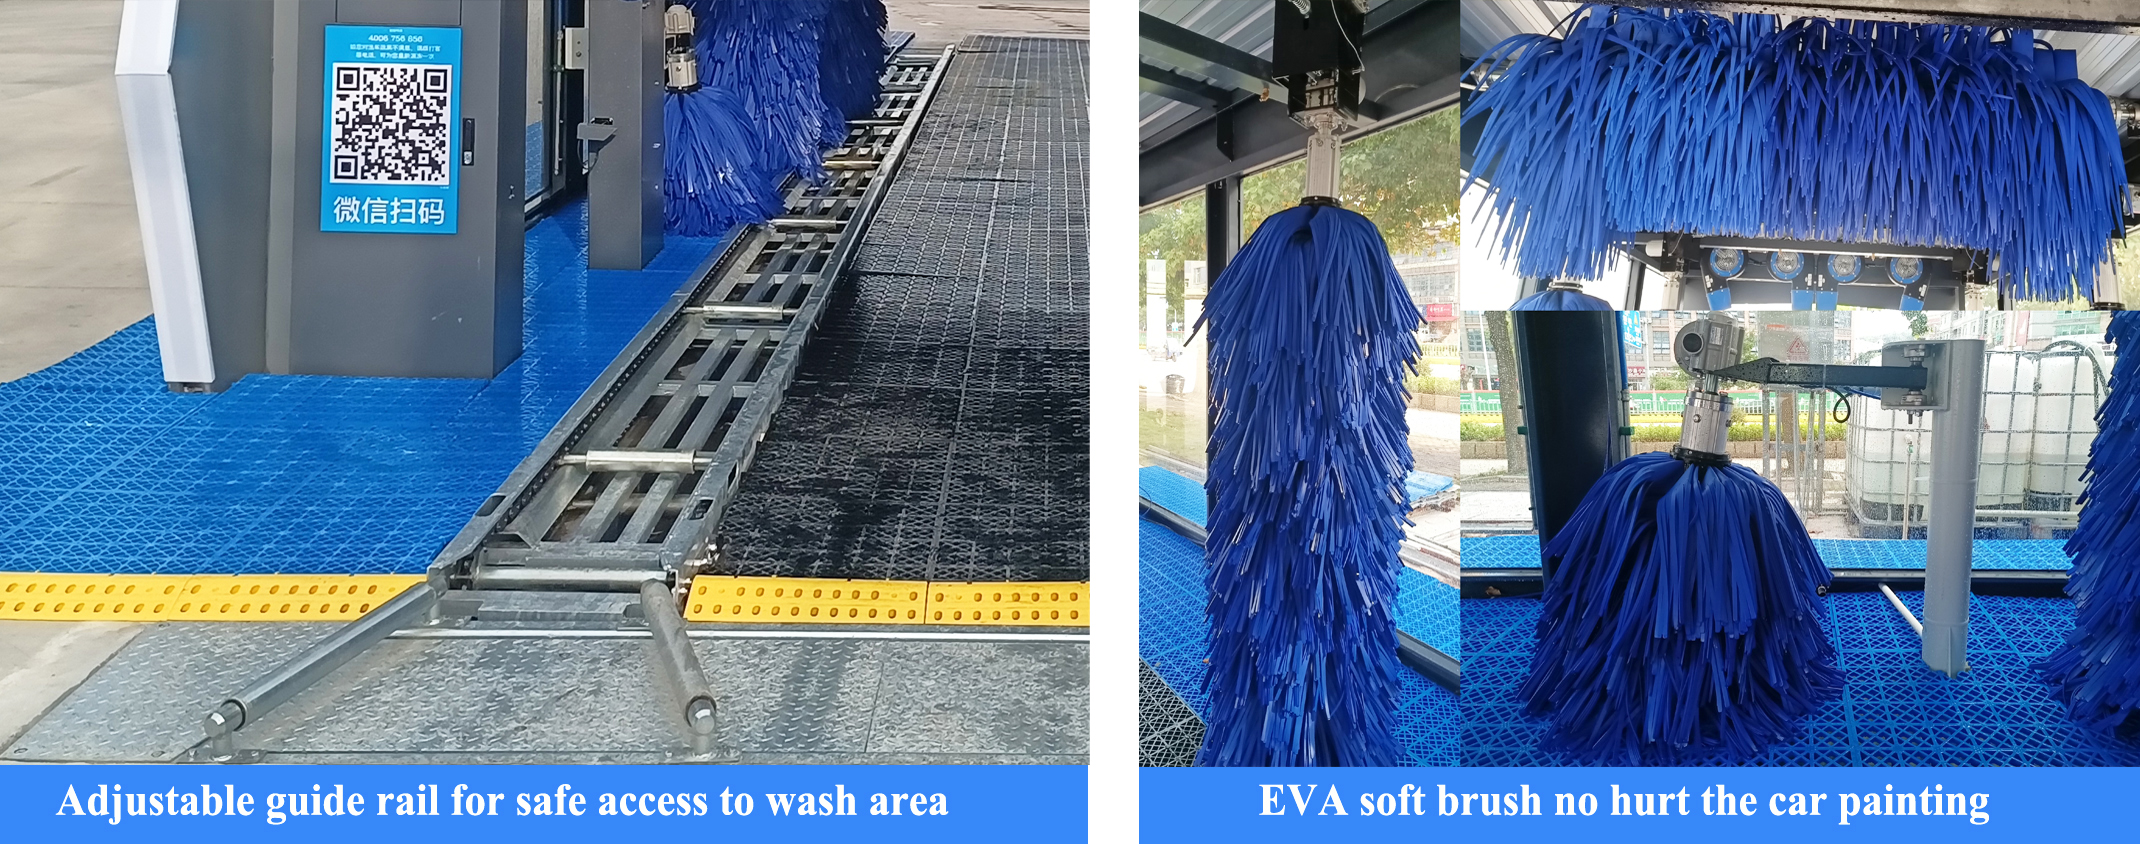 7 Brushdrive Though Tunnel Car Wash System